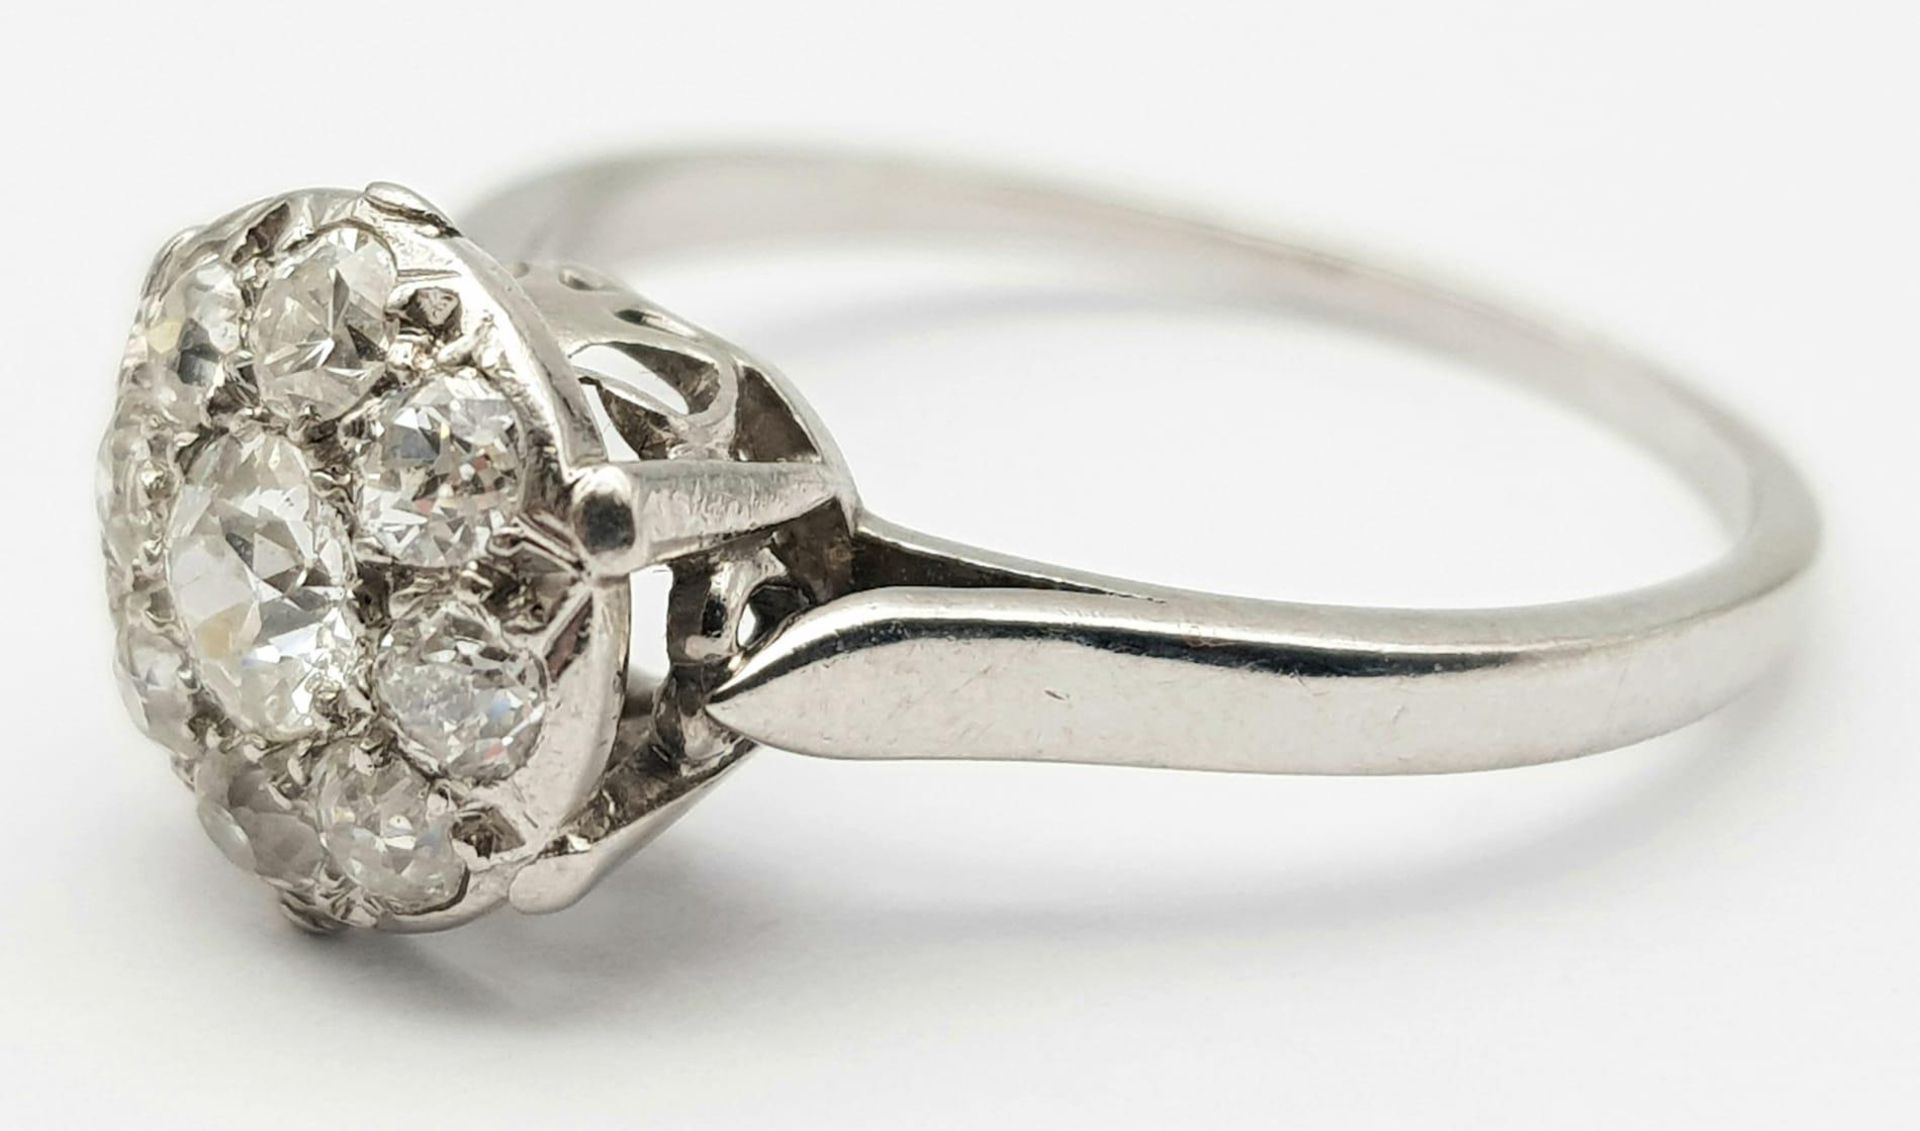 A LOVELY PLATINUM VINTAGE DIAMOND RING WITH APPROX 1.10CT OLD CUT DIAMONDS, WEIGHT 3.6G SIZE O - Image 7 of 9